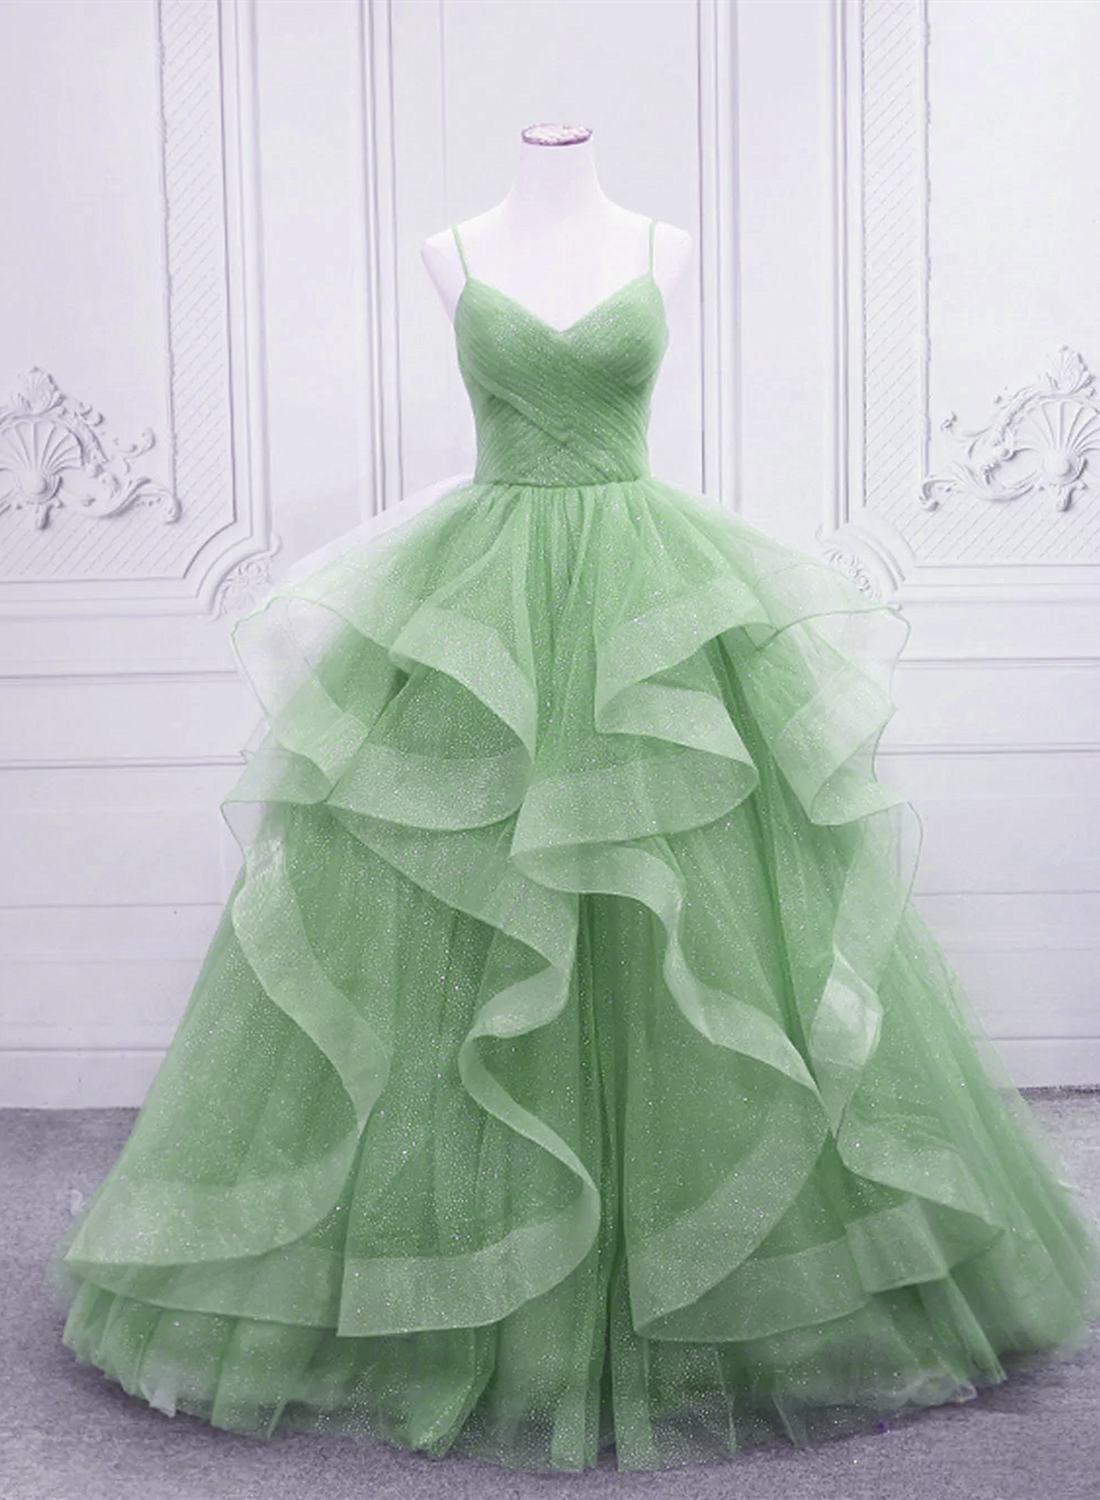 Tulle Long Formal Dress Party Prom Dress Green Evening Dress Sa1149